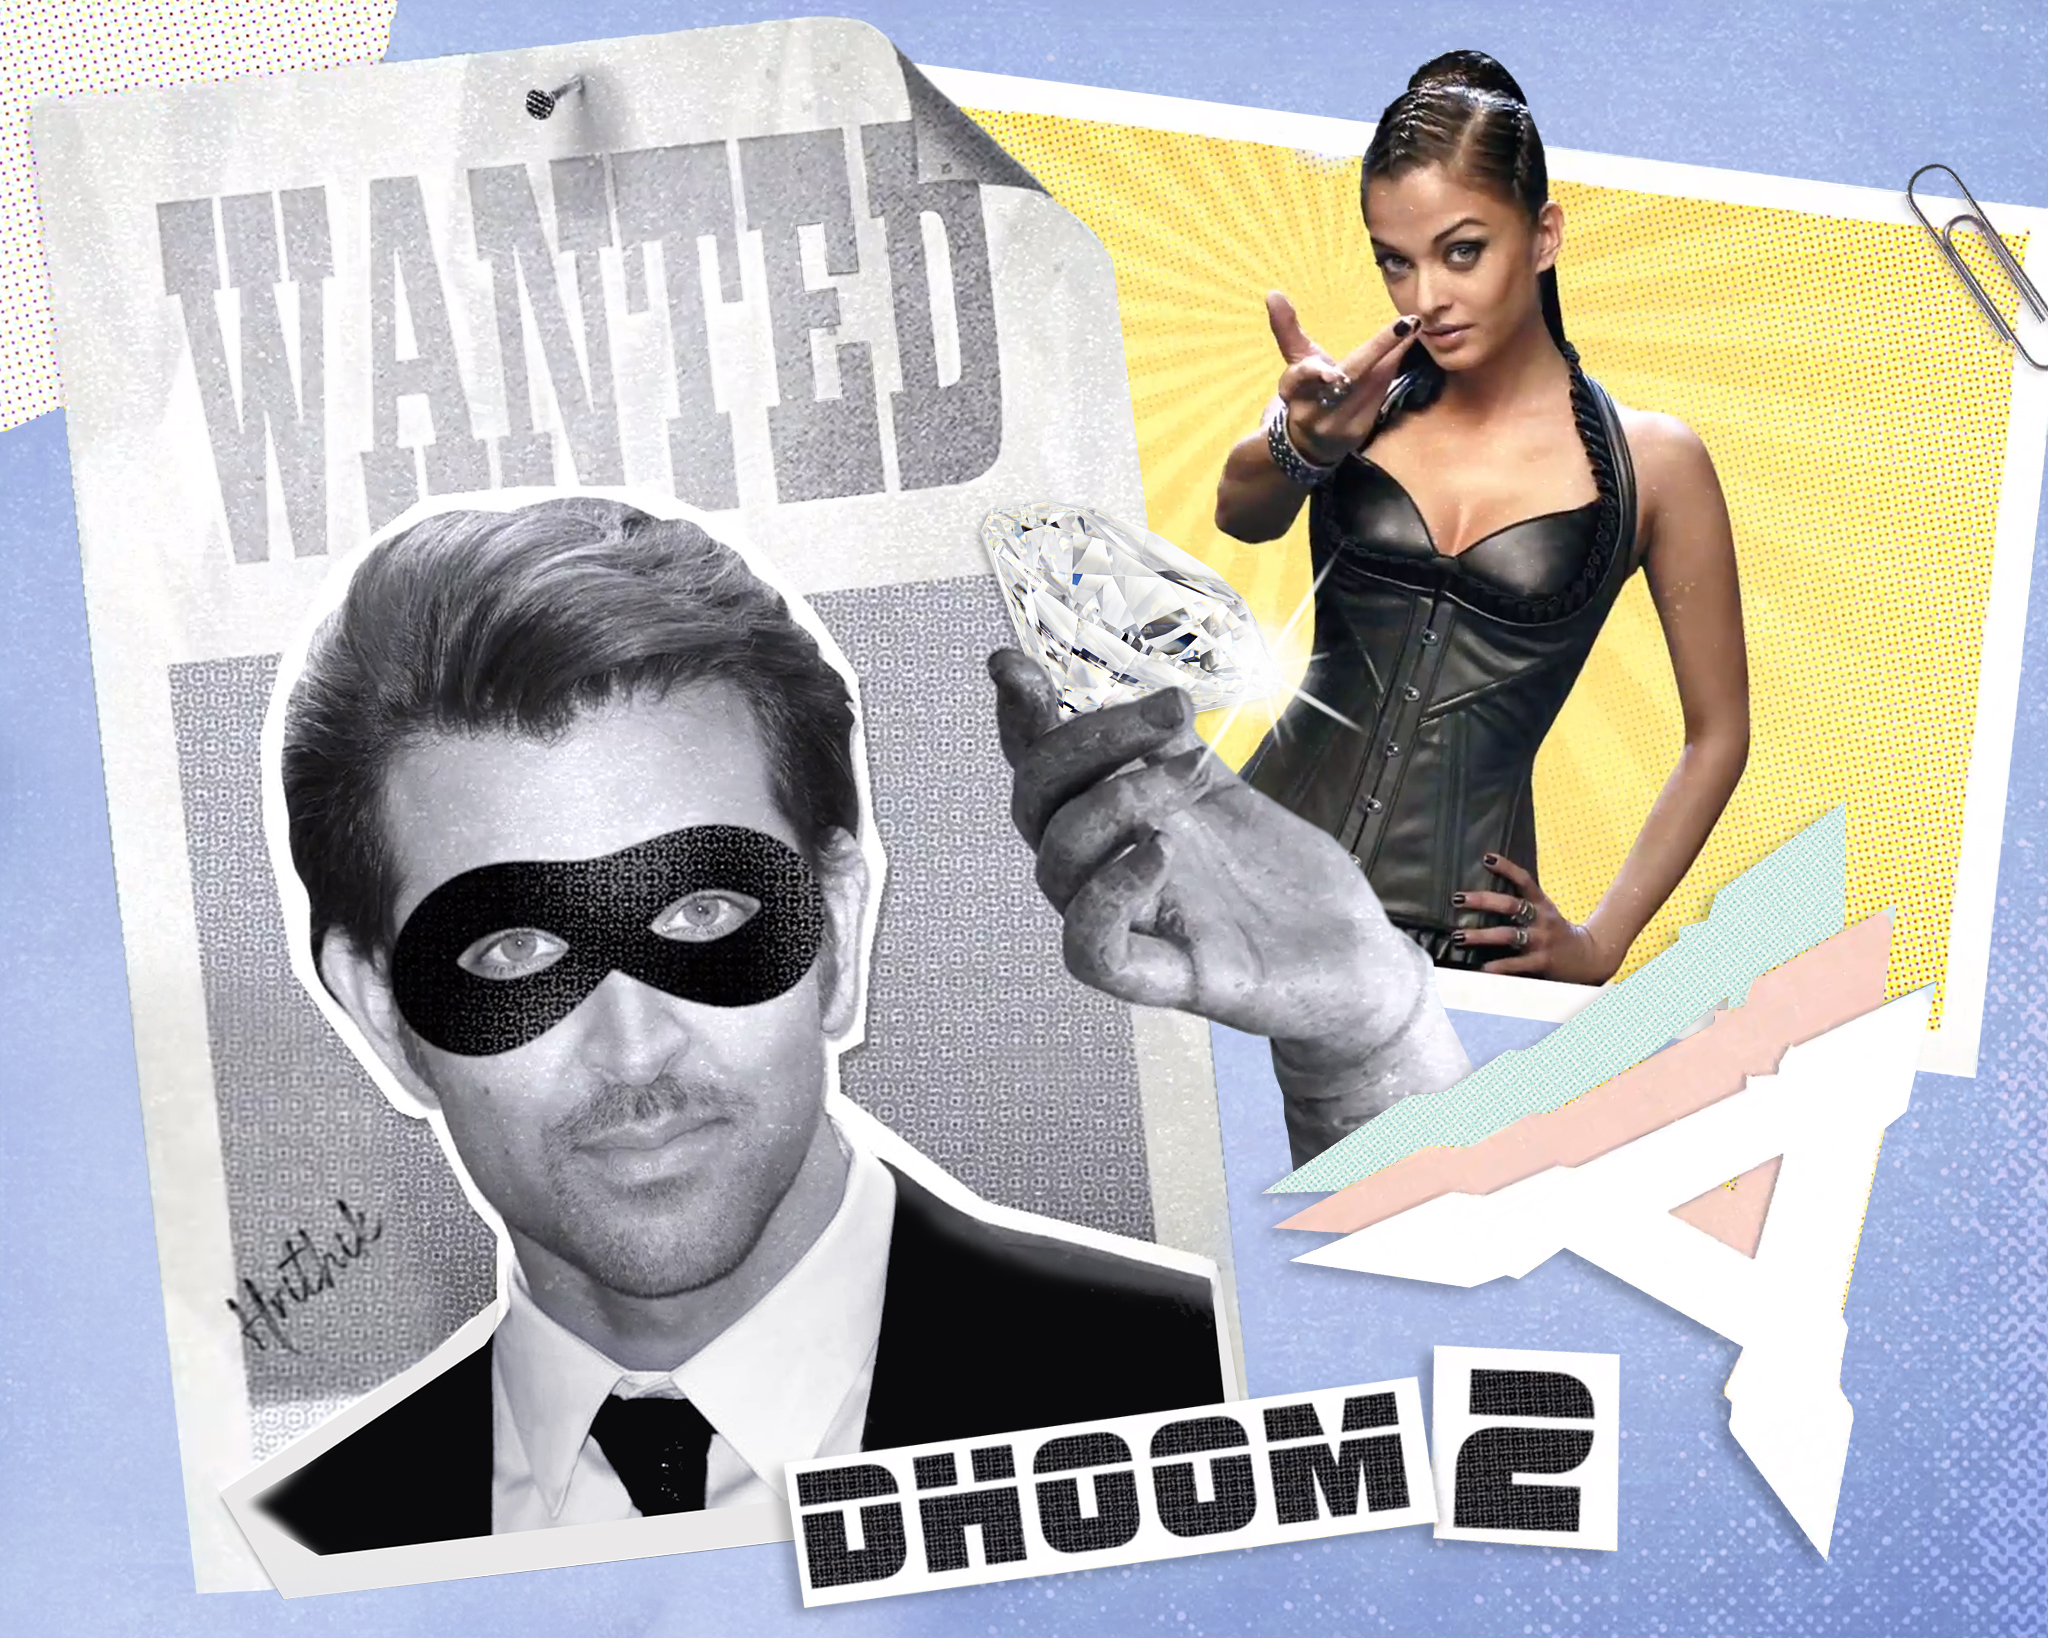 In the Bollywood hit 'Dhoom 2', two glamorous crooks team up to steal a precious diamond from a museum